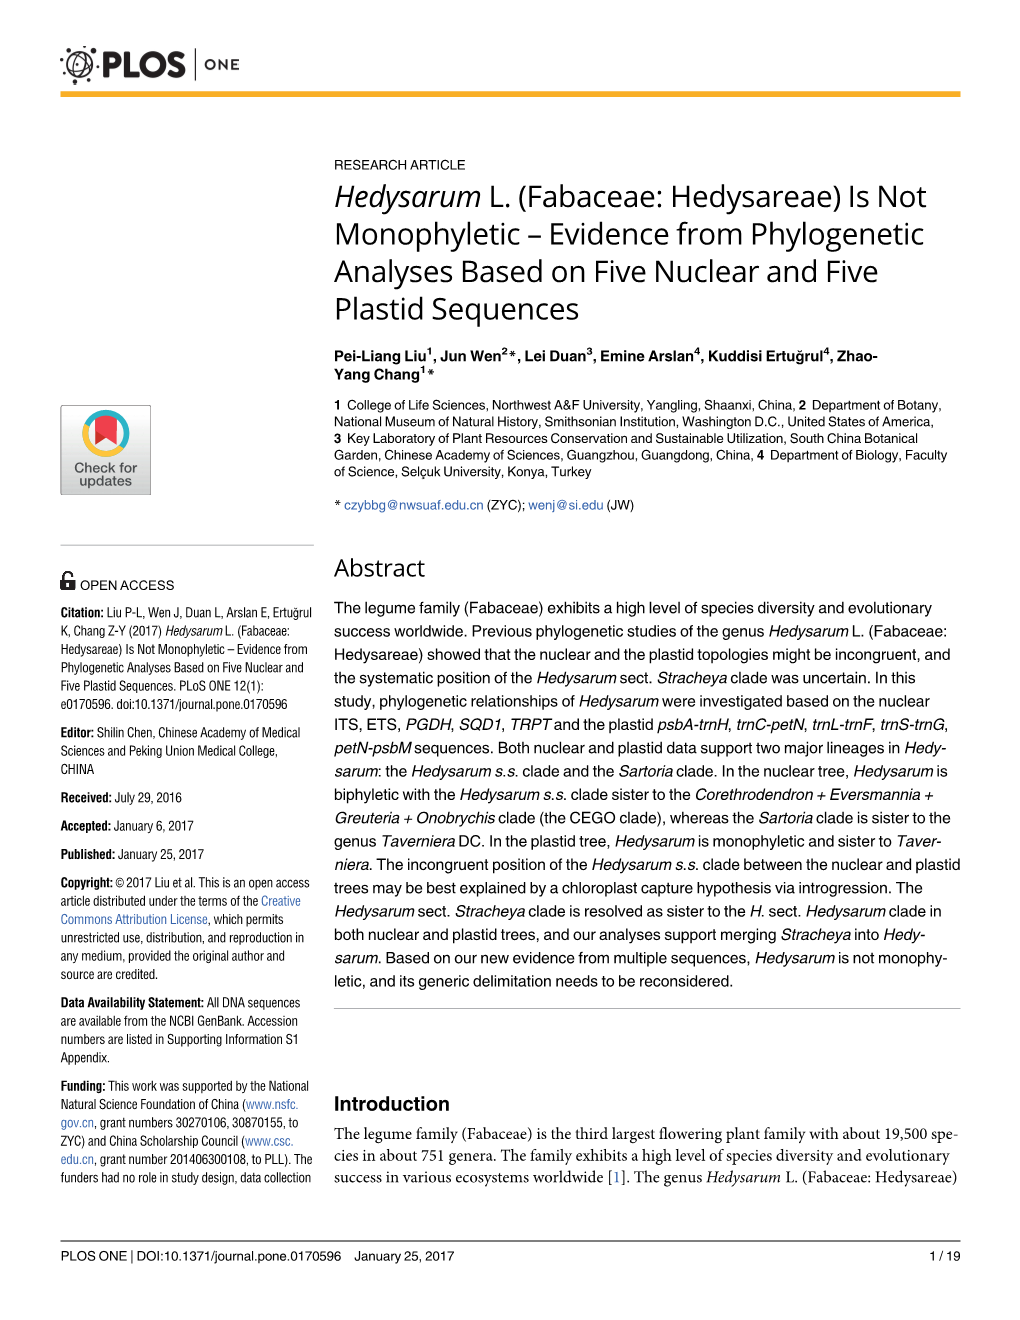 Evidence from Phylogenetic Analyses Based on Five Nuclear and Five Plastid Sequences